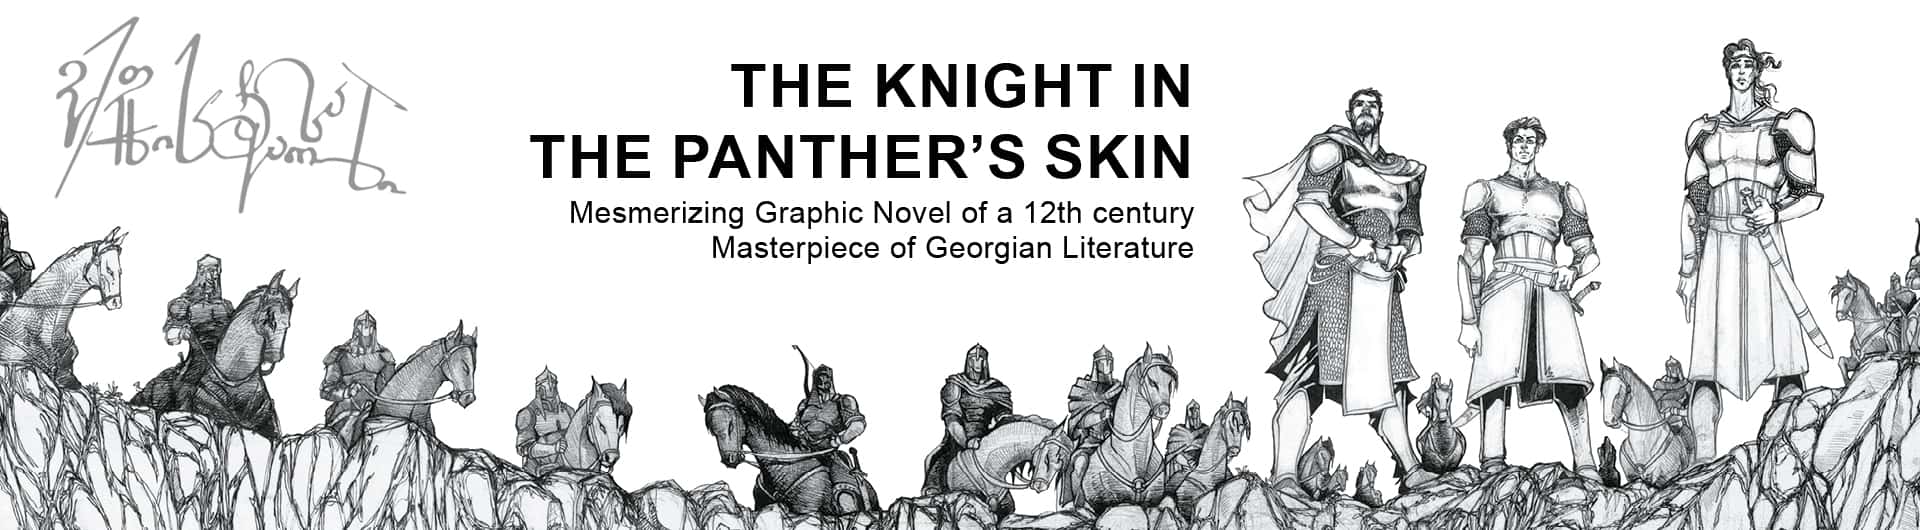 The-Knight-In-The-Panther's-Skin